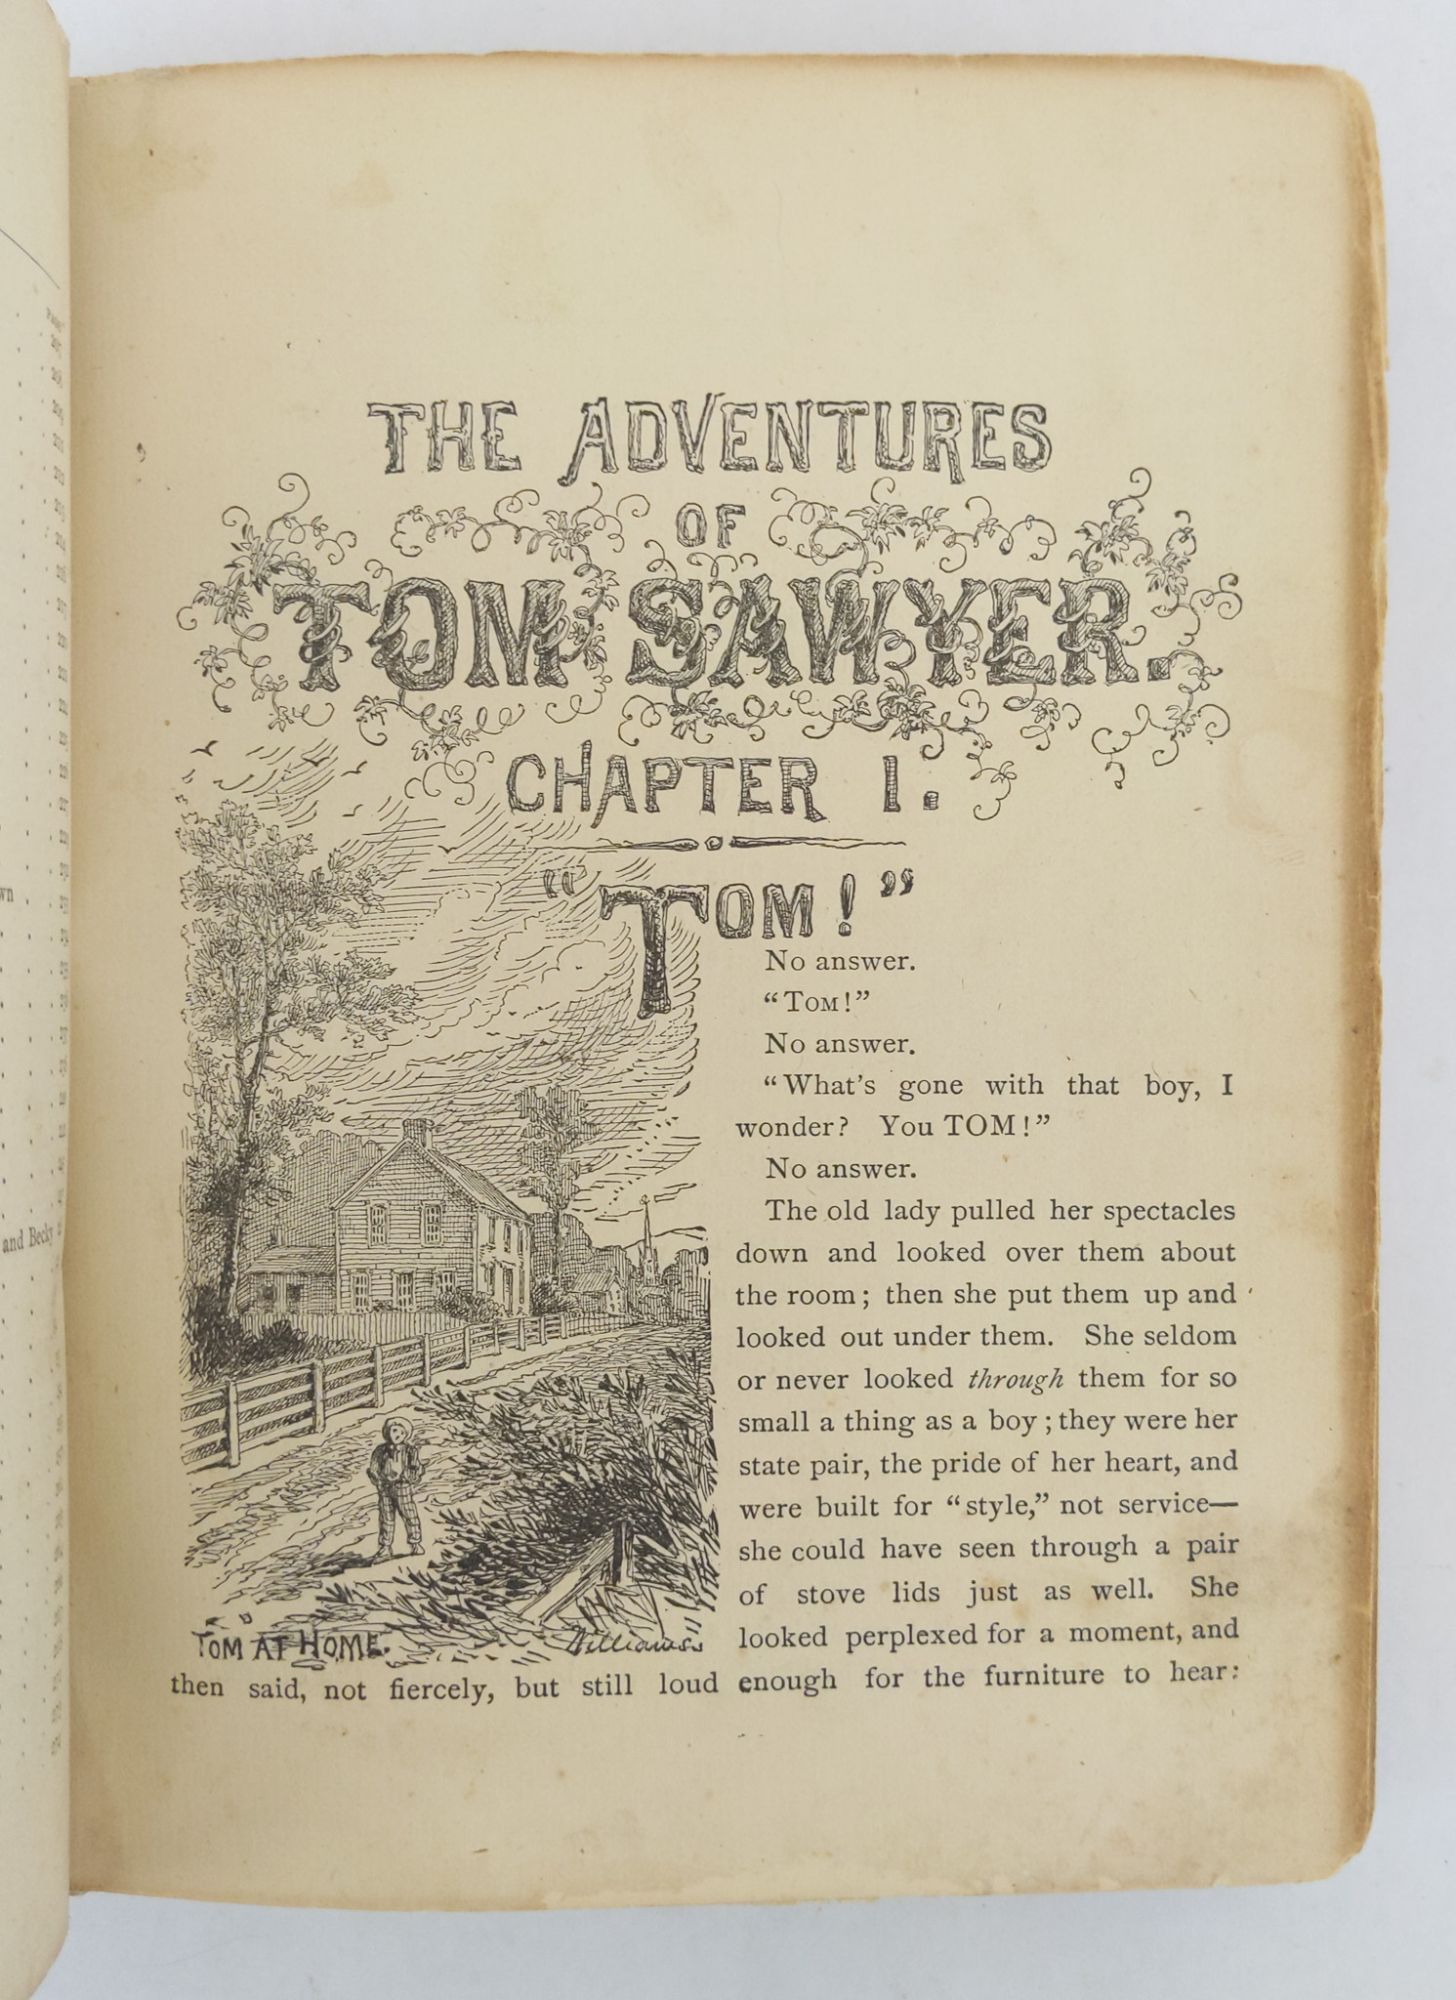 Product Image for THE ADVENTURES OF TOM SAWYER